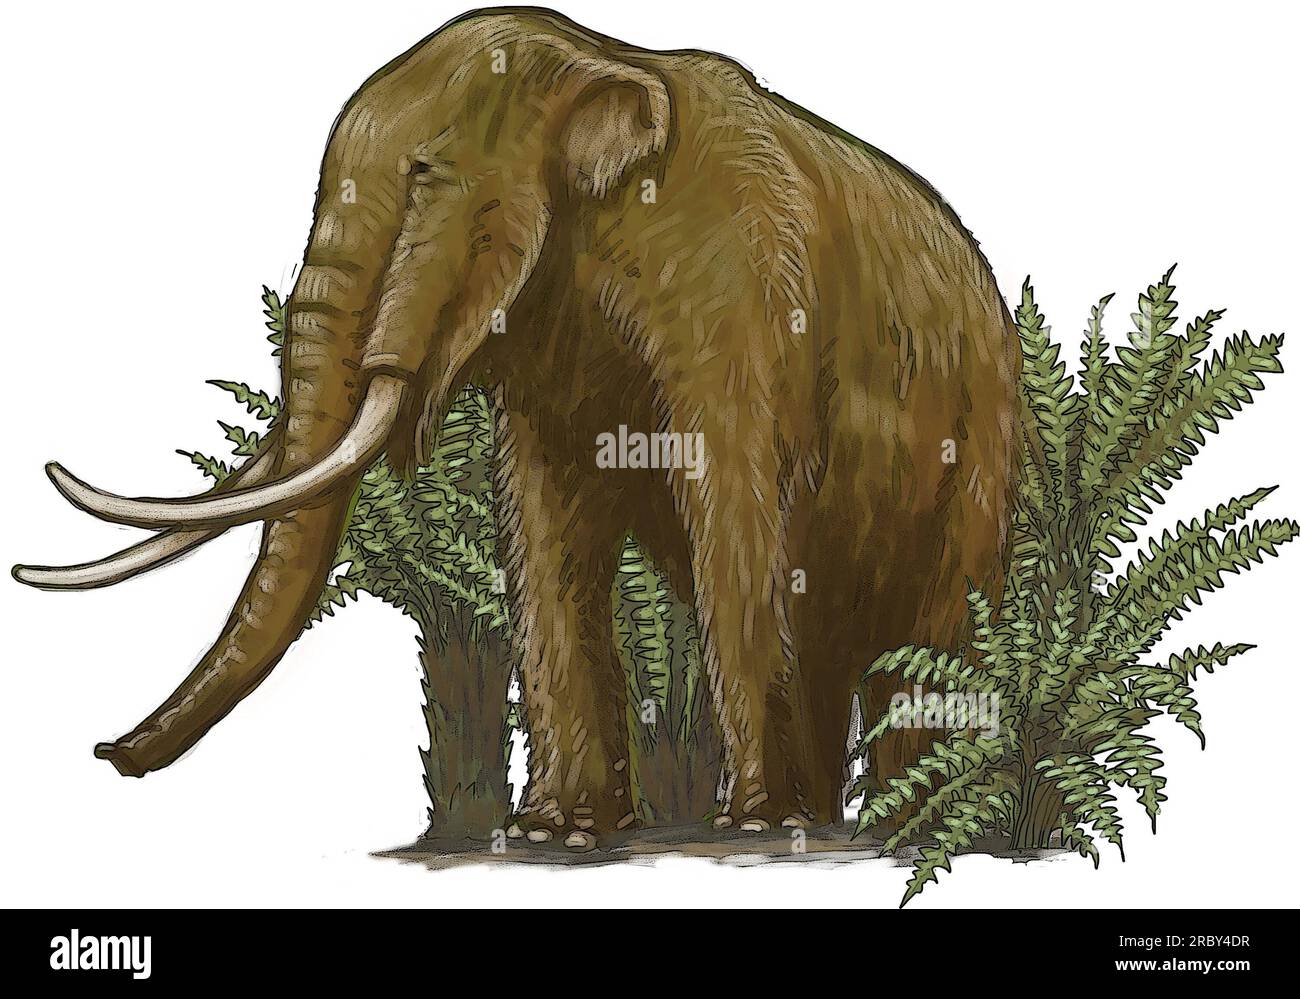 Art of young woolly mammoth (Mammuthus primigenius) species that lived during the Pleistocene until its extinction in the Holocene, elephant ancestor. Stock Photo